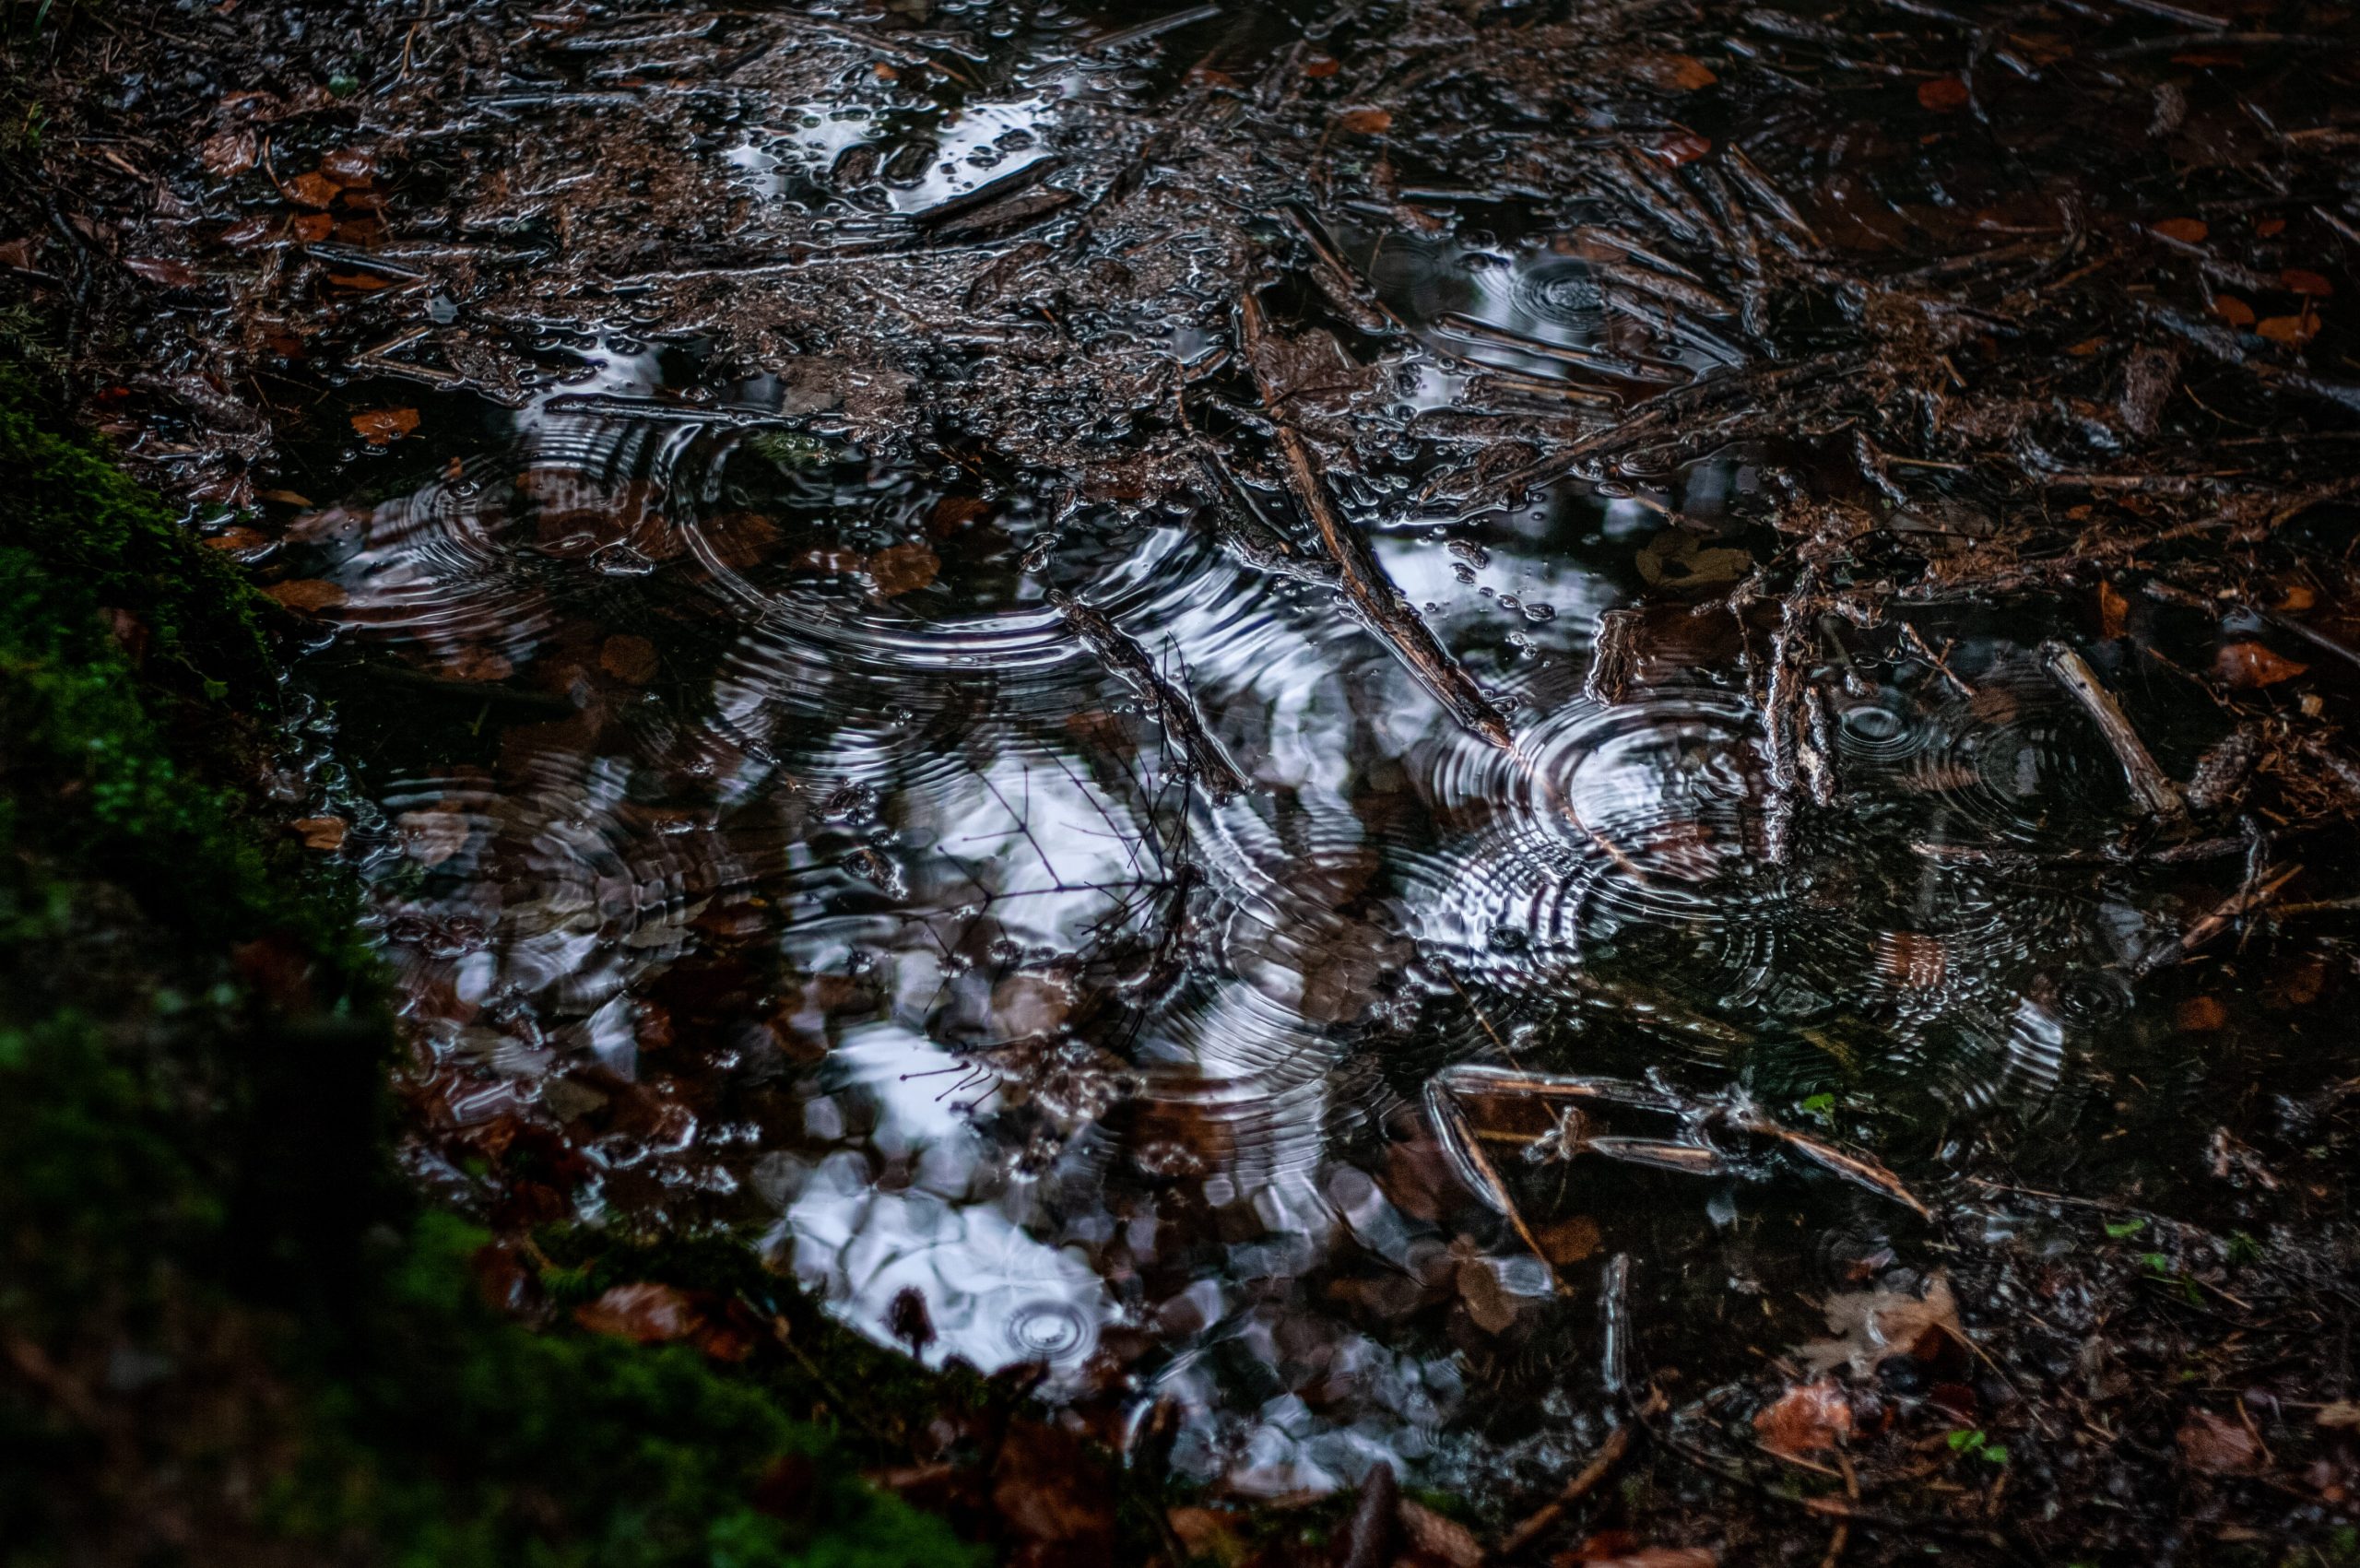 A photograph of a puddle on the forest floor. The puddle has several small ripples in it and is filled with brown leaves and pine needles.